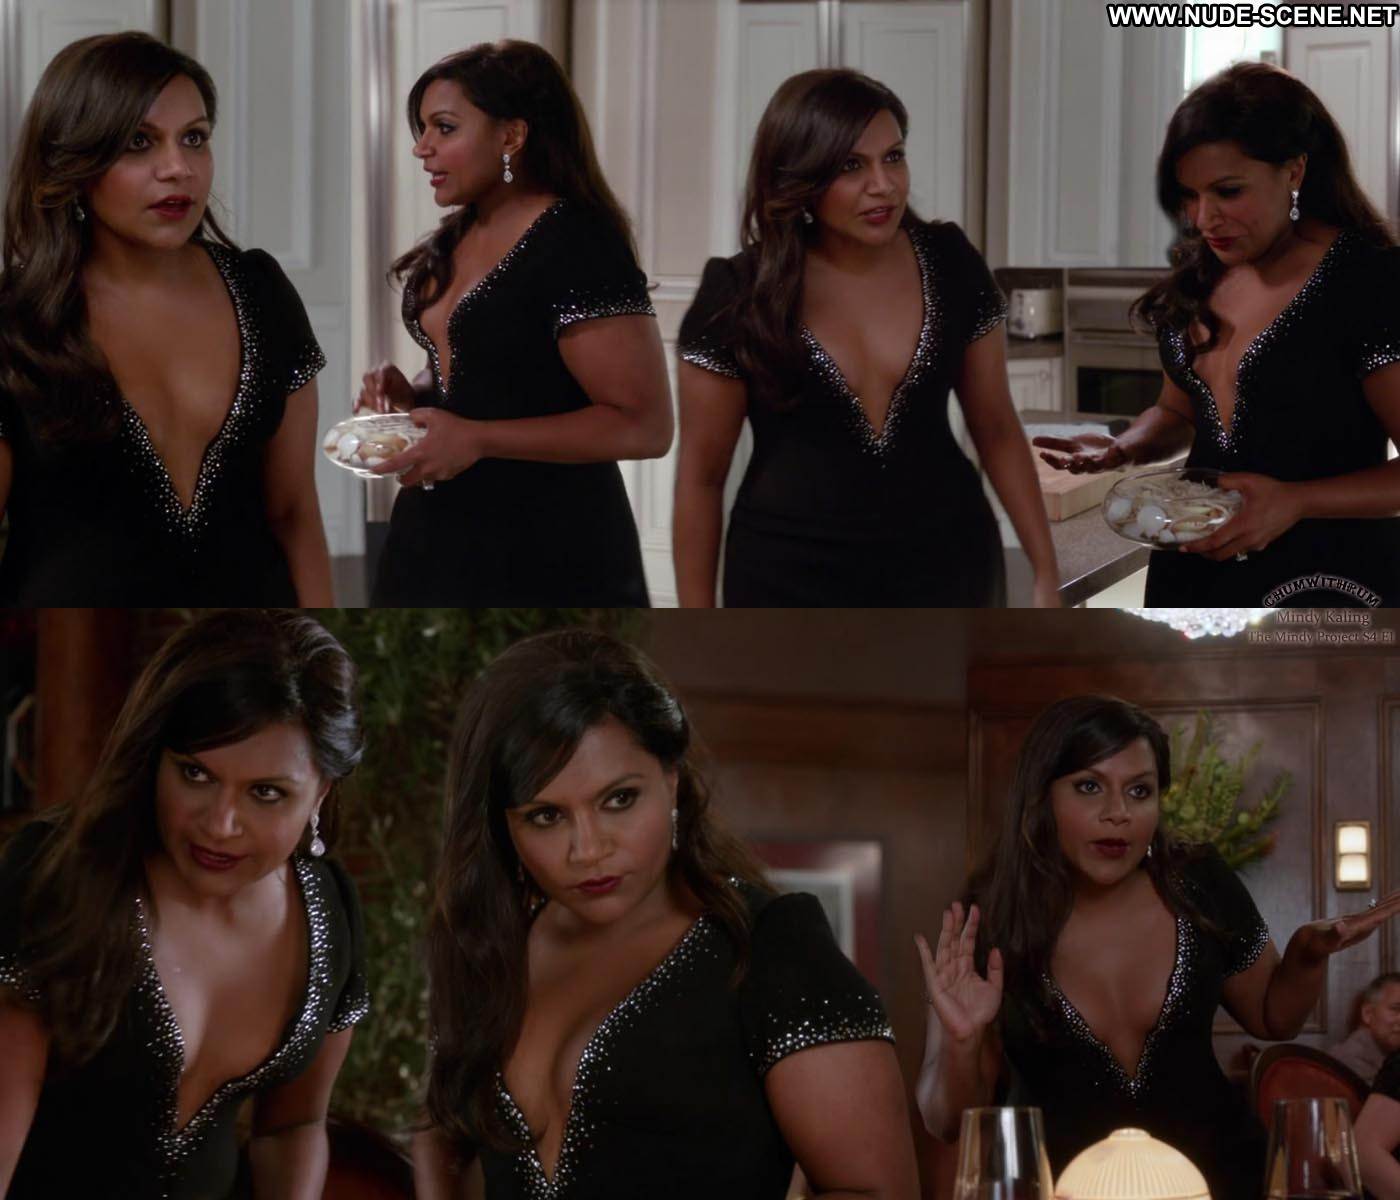 Mindy kaling ever been nude ♥ Mindy kaling ever been nude 🍓 